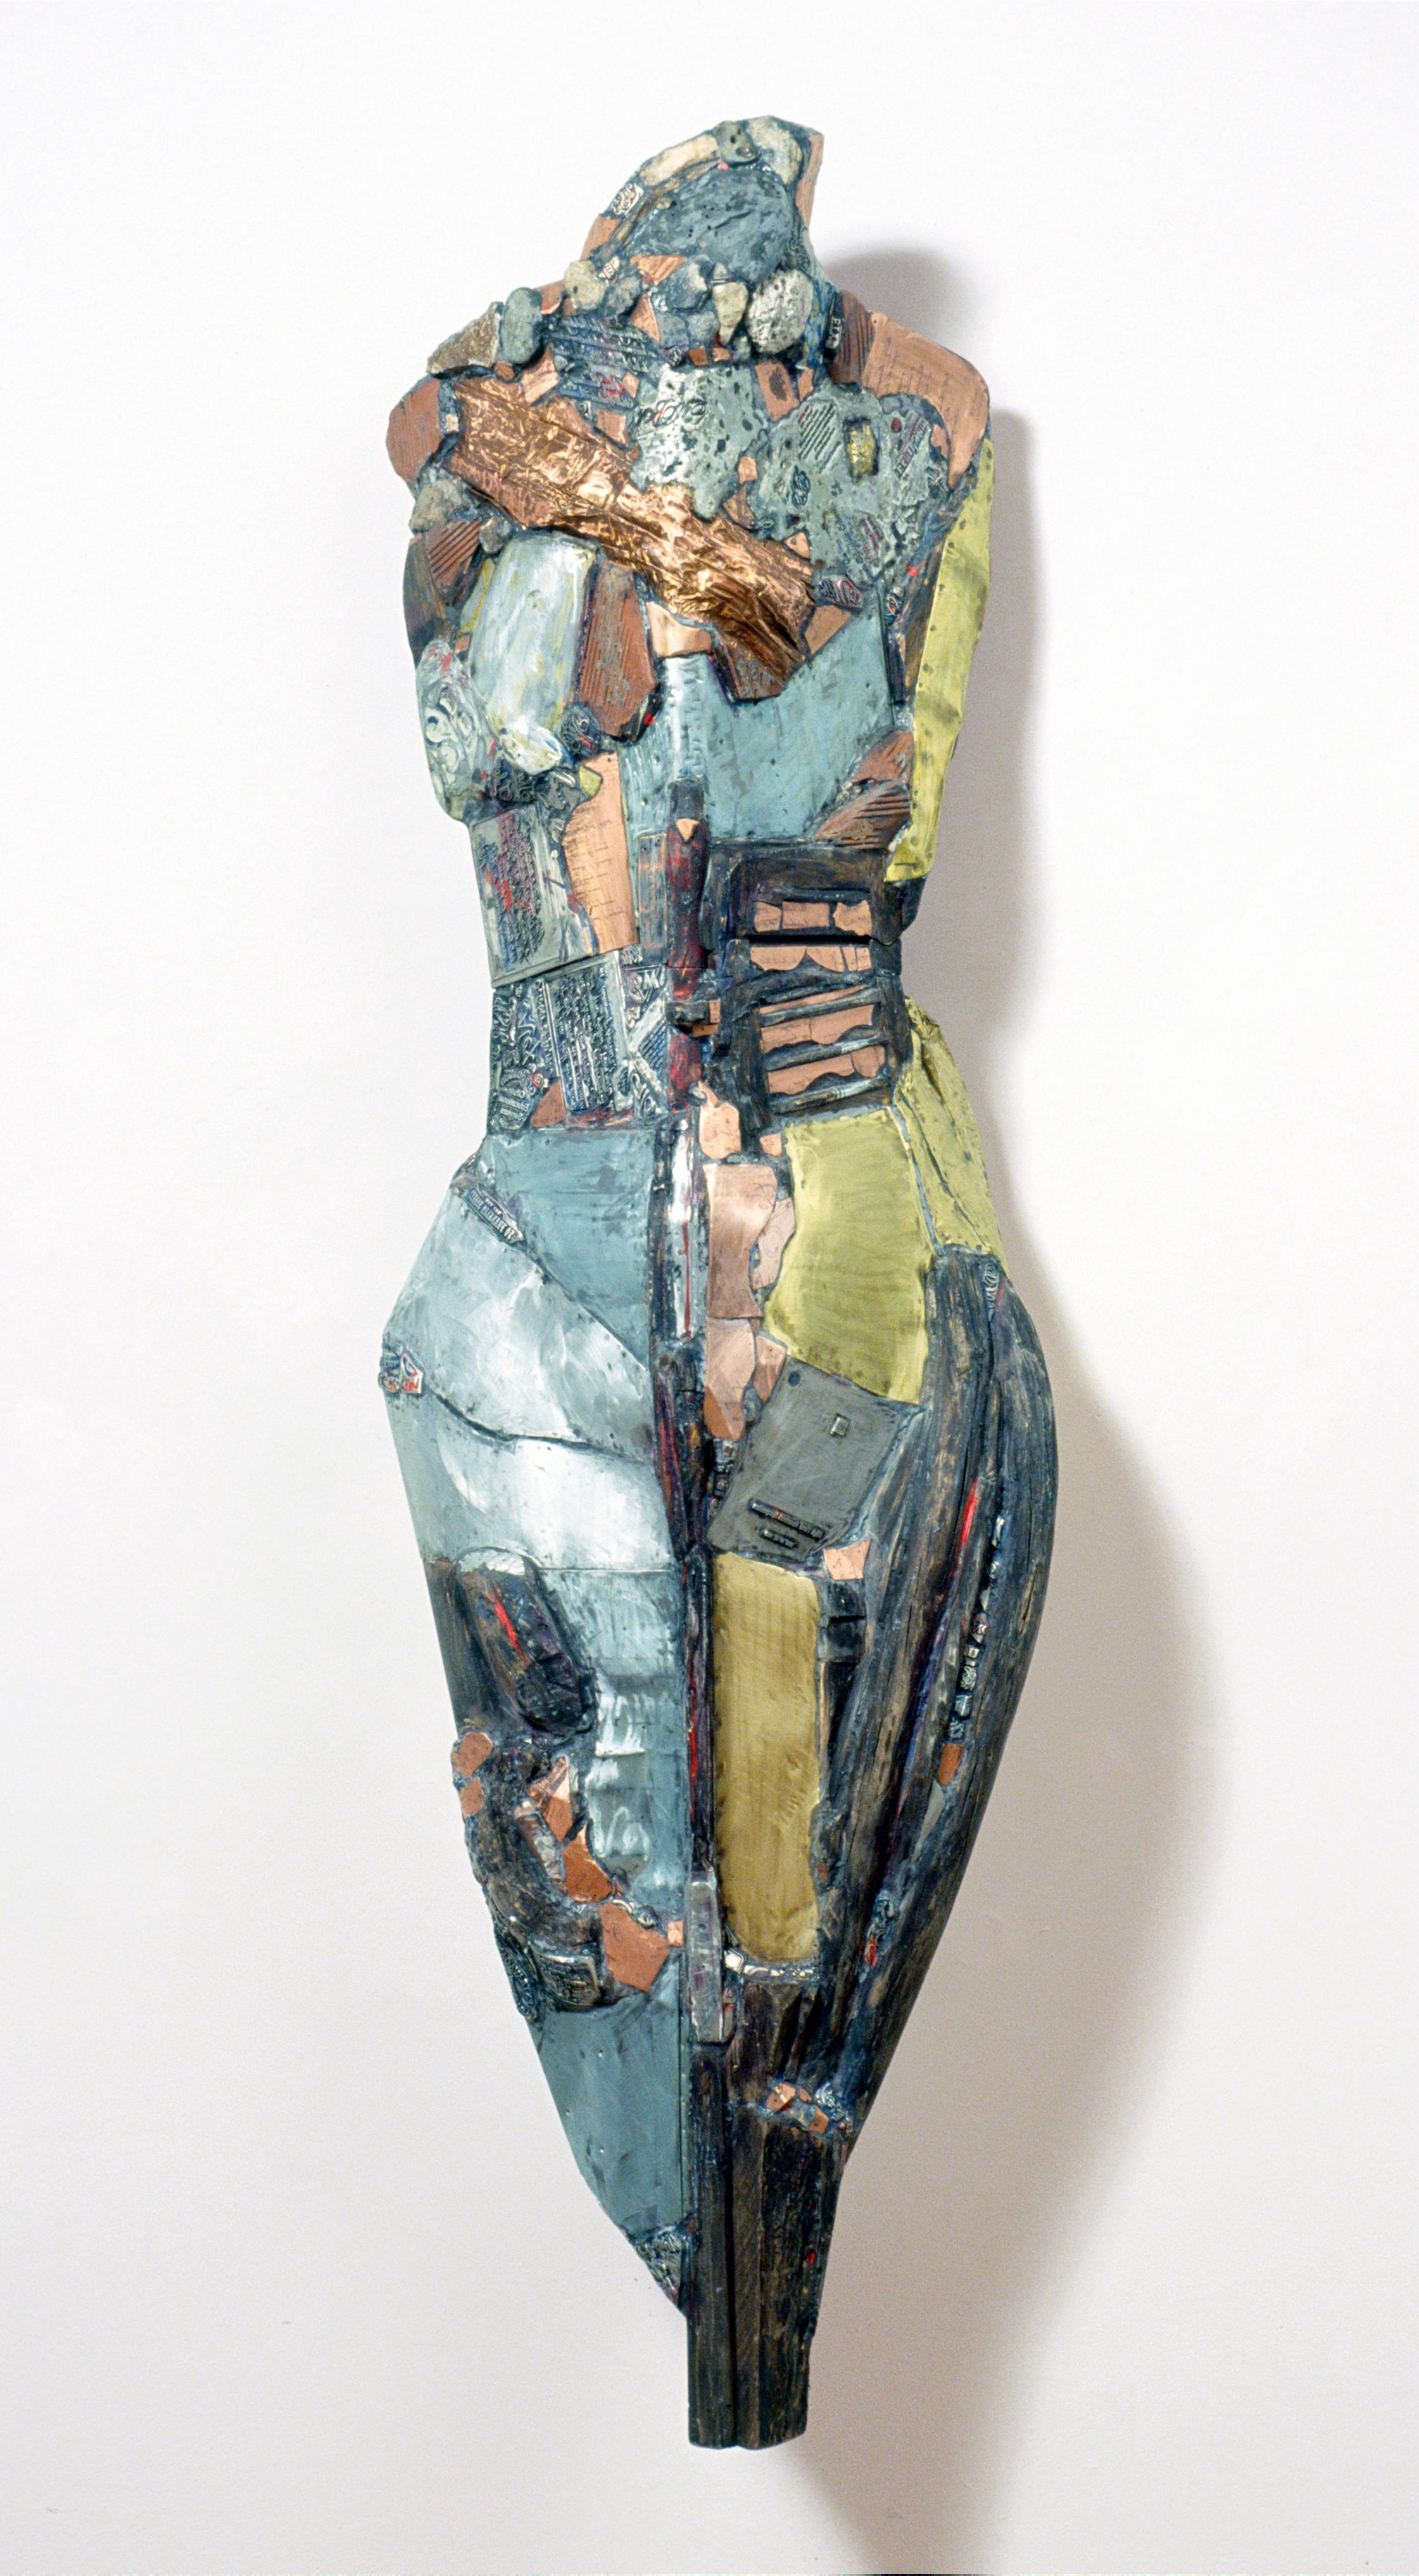 Linda Stein, Knight of Tomorrow 542 - Contemporary Metal Stone Wood Sculpture